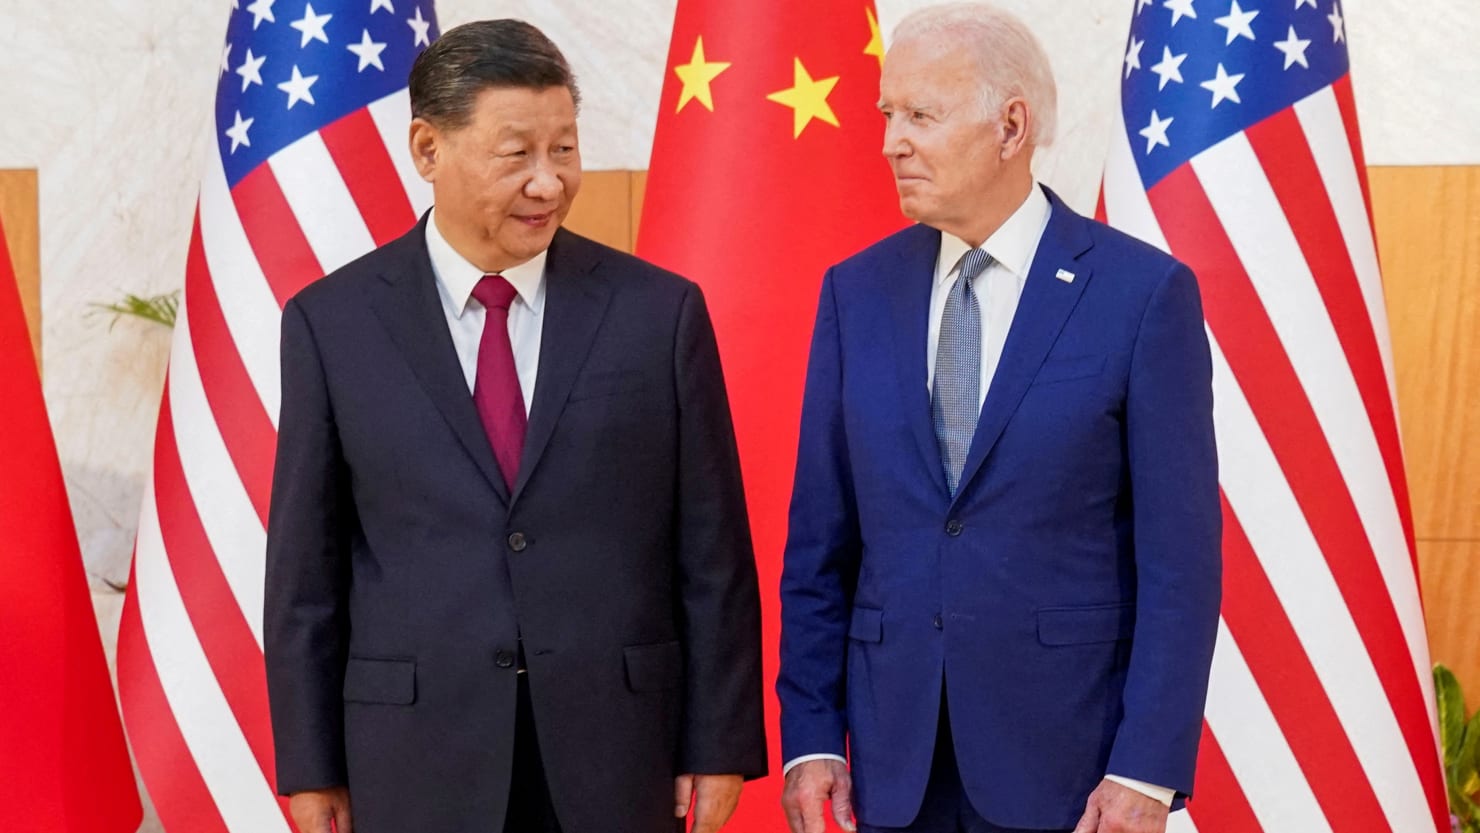 Plans Being Made for Biden to Meet Xi in California: Report